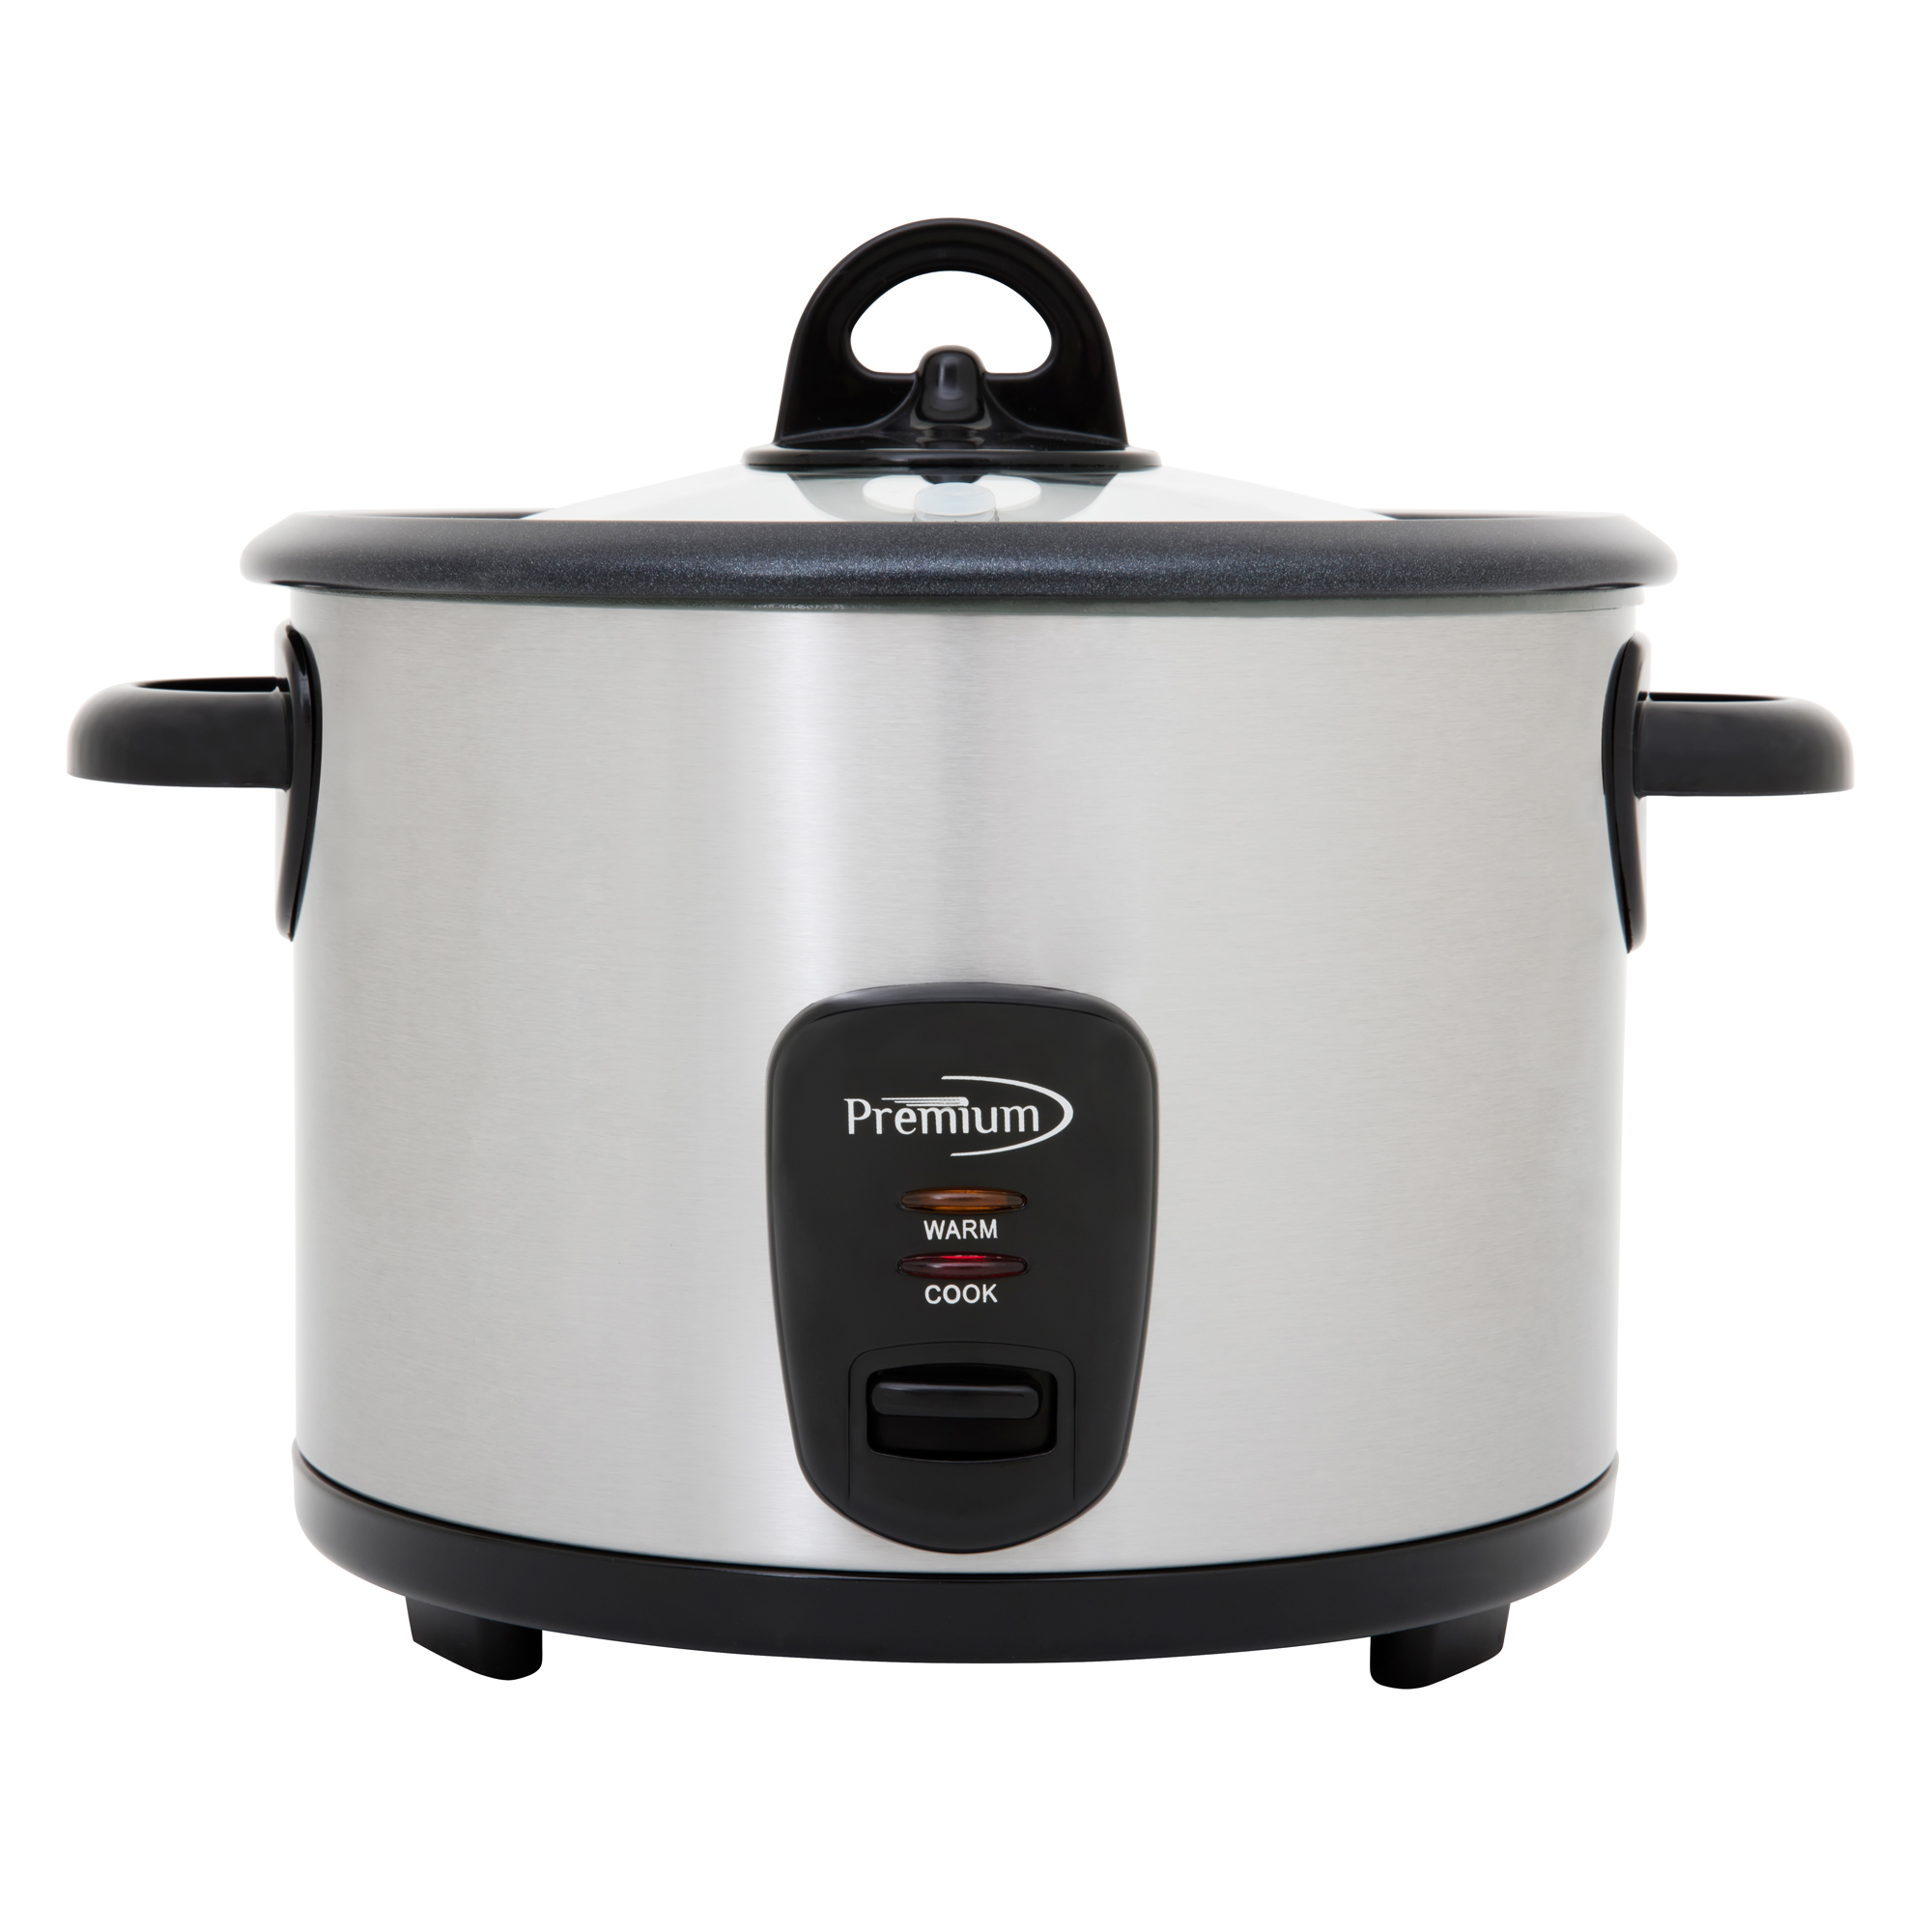 Premium PRC1547 1.5L Rice Cooker - Stainless Steel